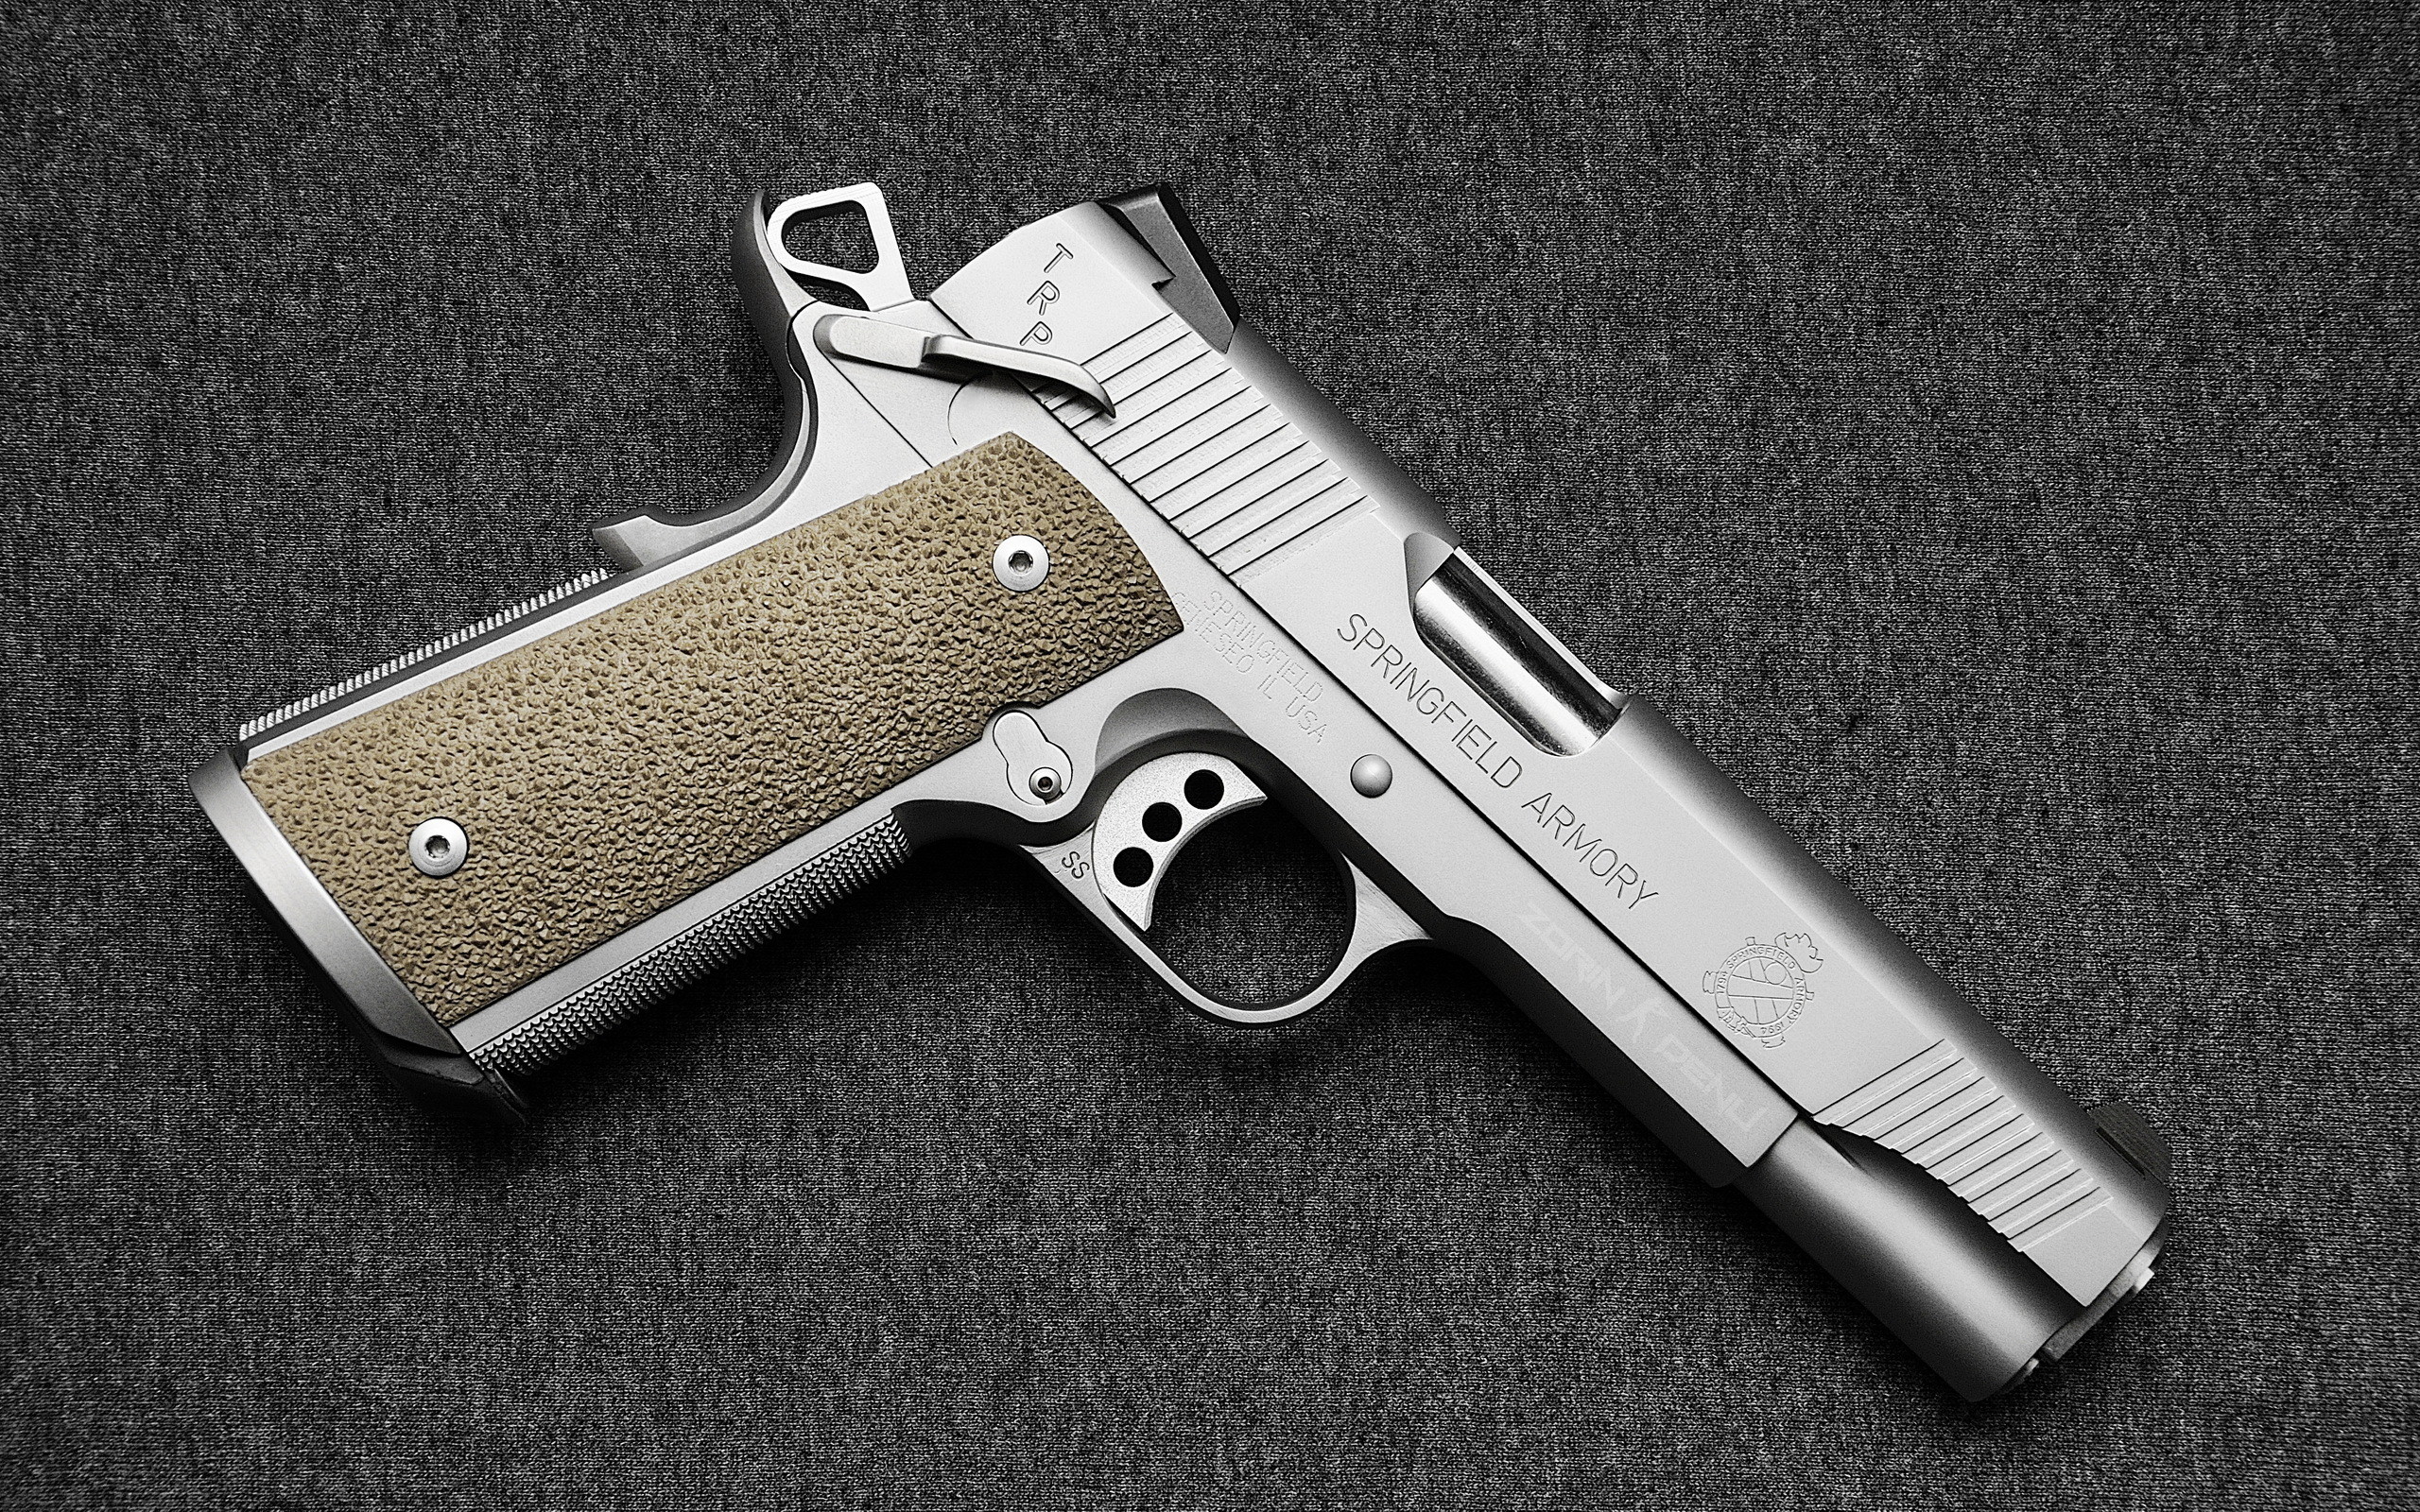 2560x1600 1911 Pistol Wallpapers and 12 Springfield Armory 1911 Pistol Wallpapers |  Springfield Armory